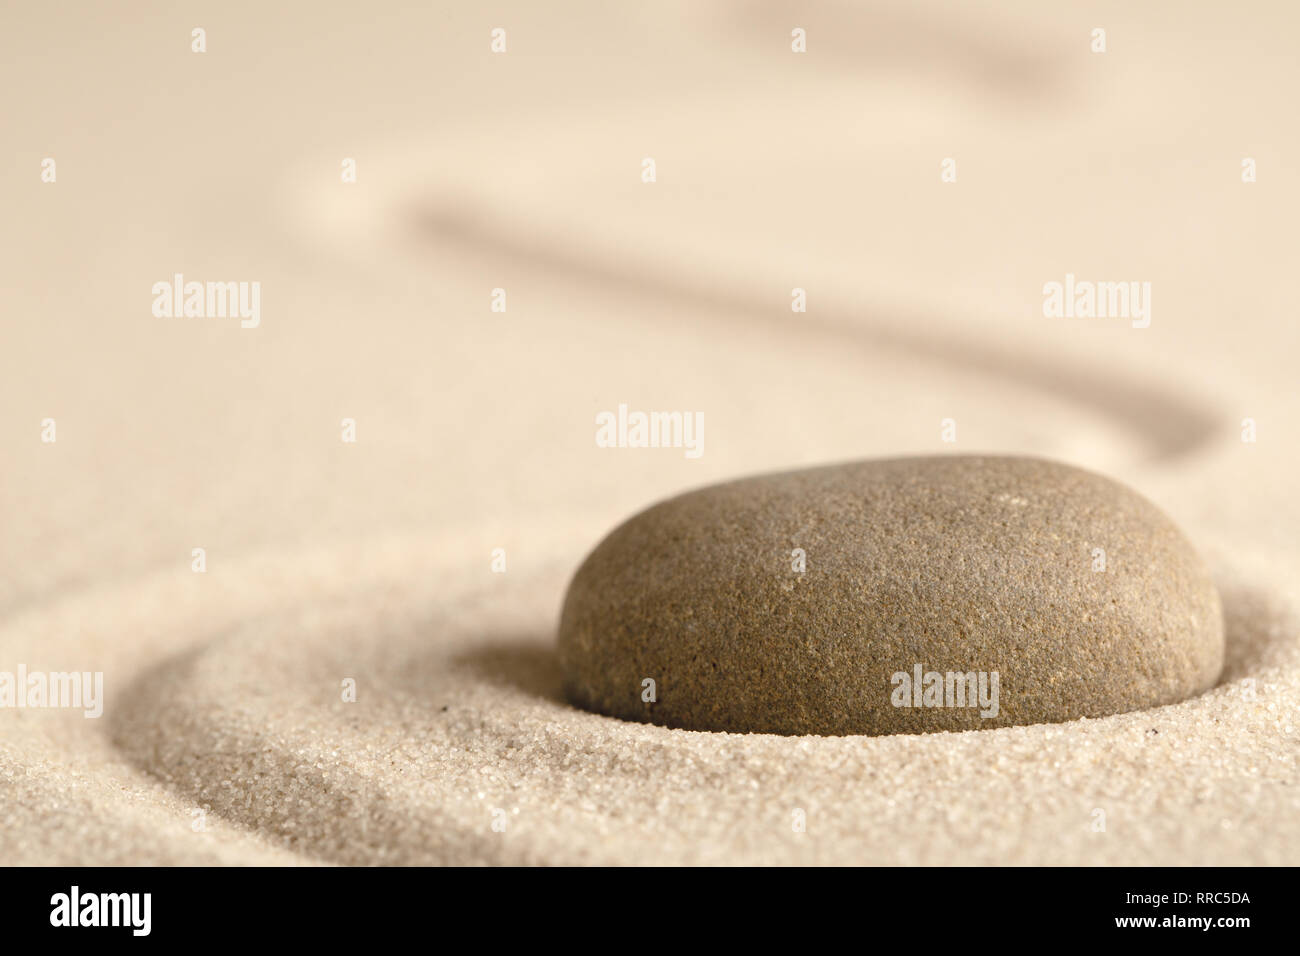 Zen meditation stone with raked line in sand. Concept for harmony relaxation and purity. Stock Photo